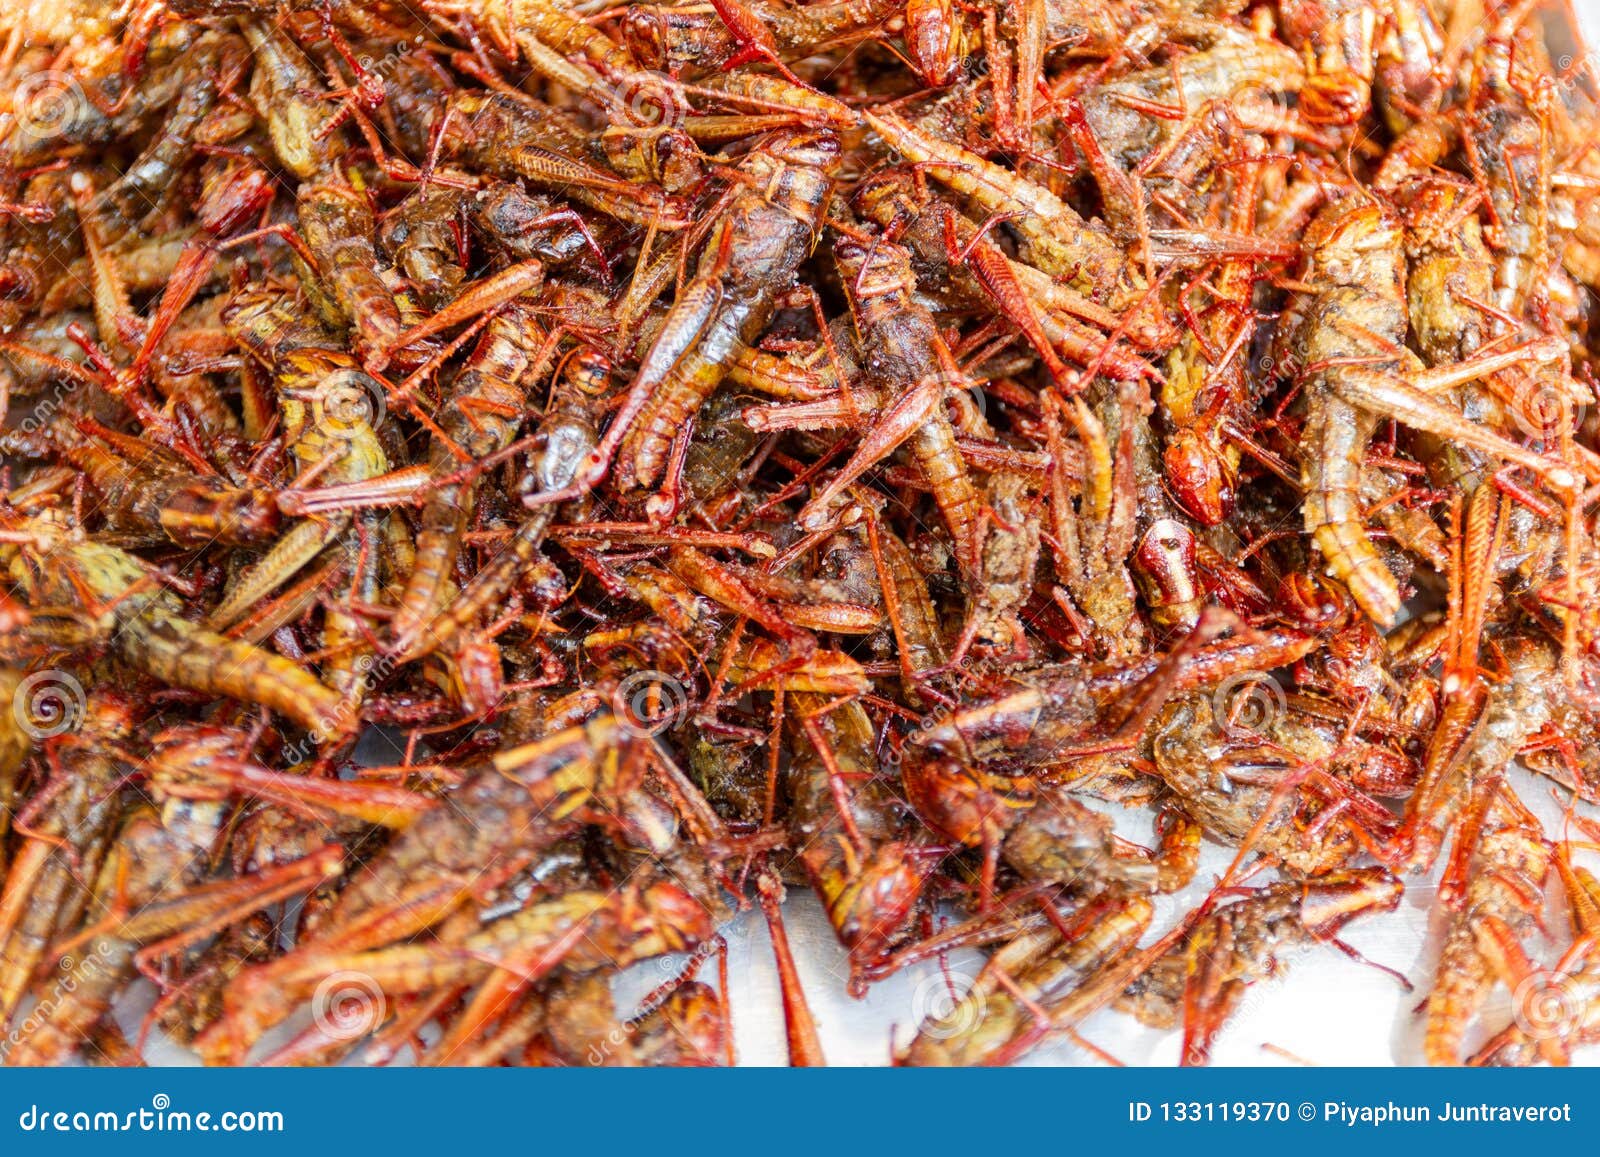 fried-insects-grasshopper-insect-crispy-thai-food-street-market-available-bangkok-thailand-133119370.jpg